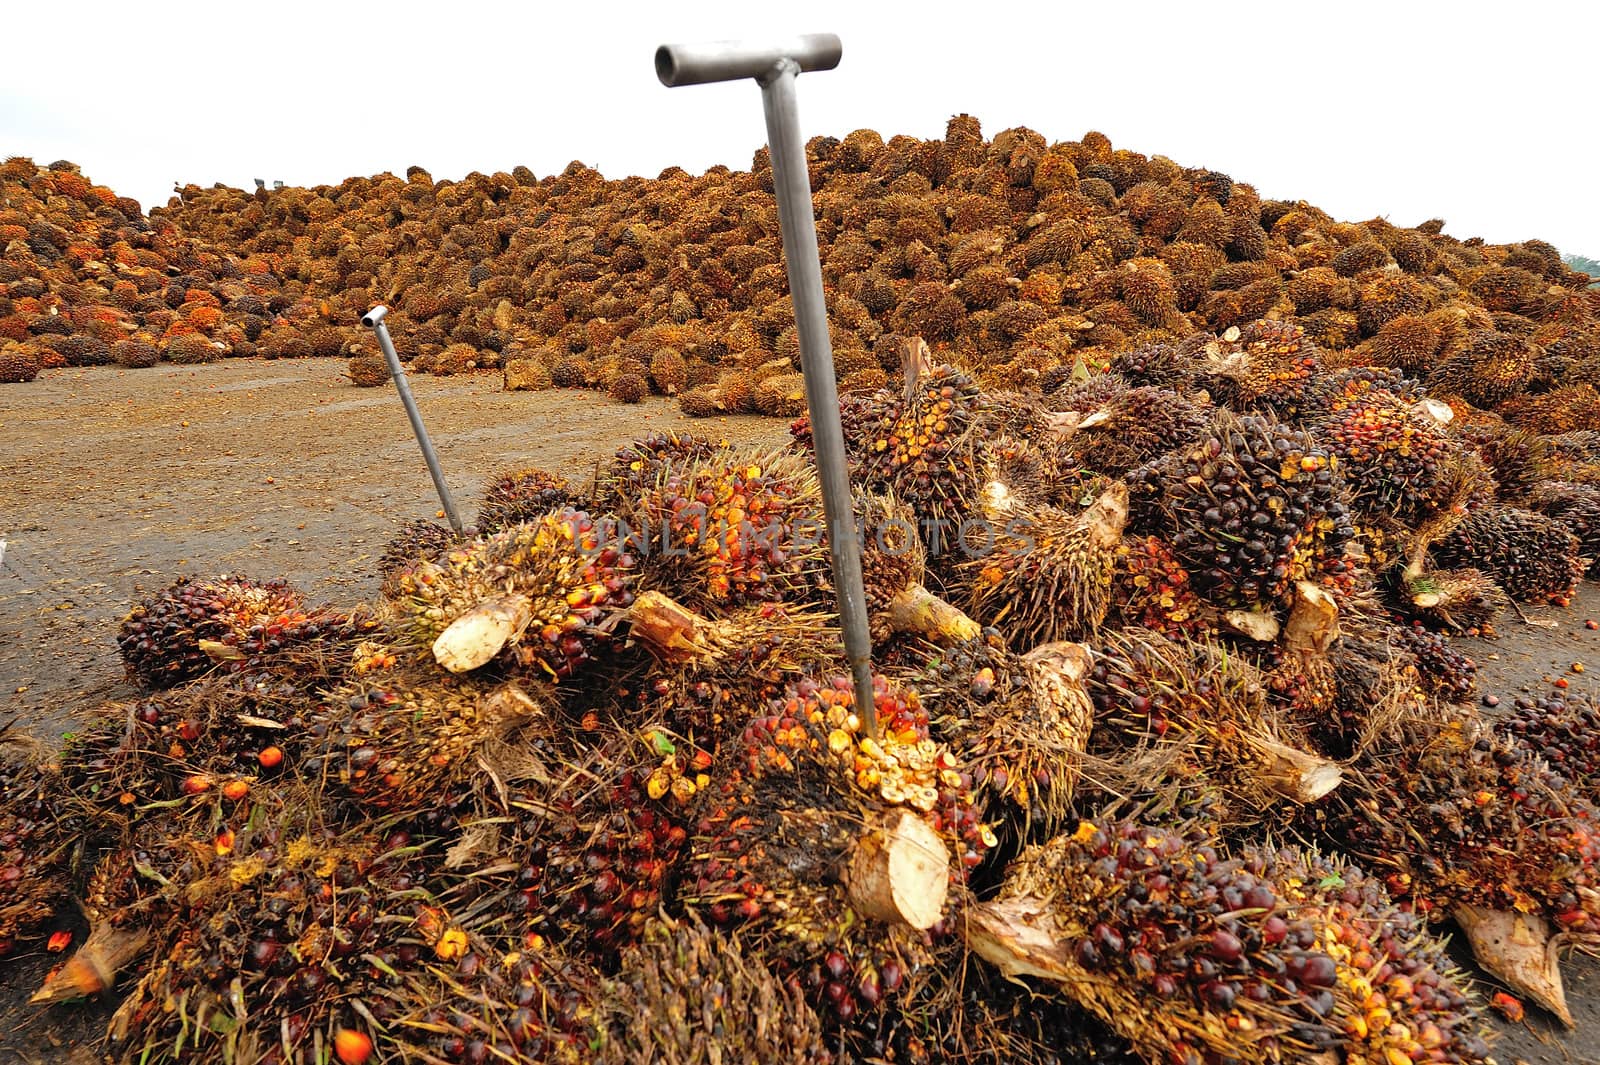 Palm Oil Fruits on the floor